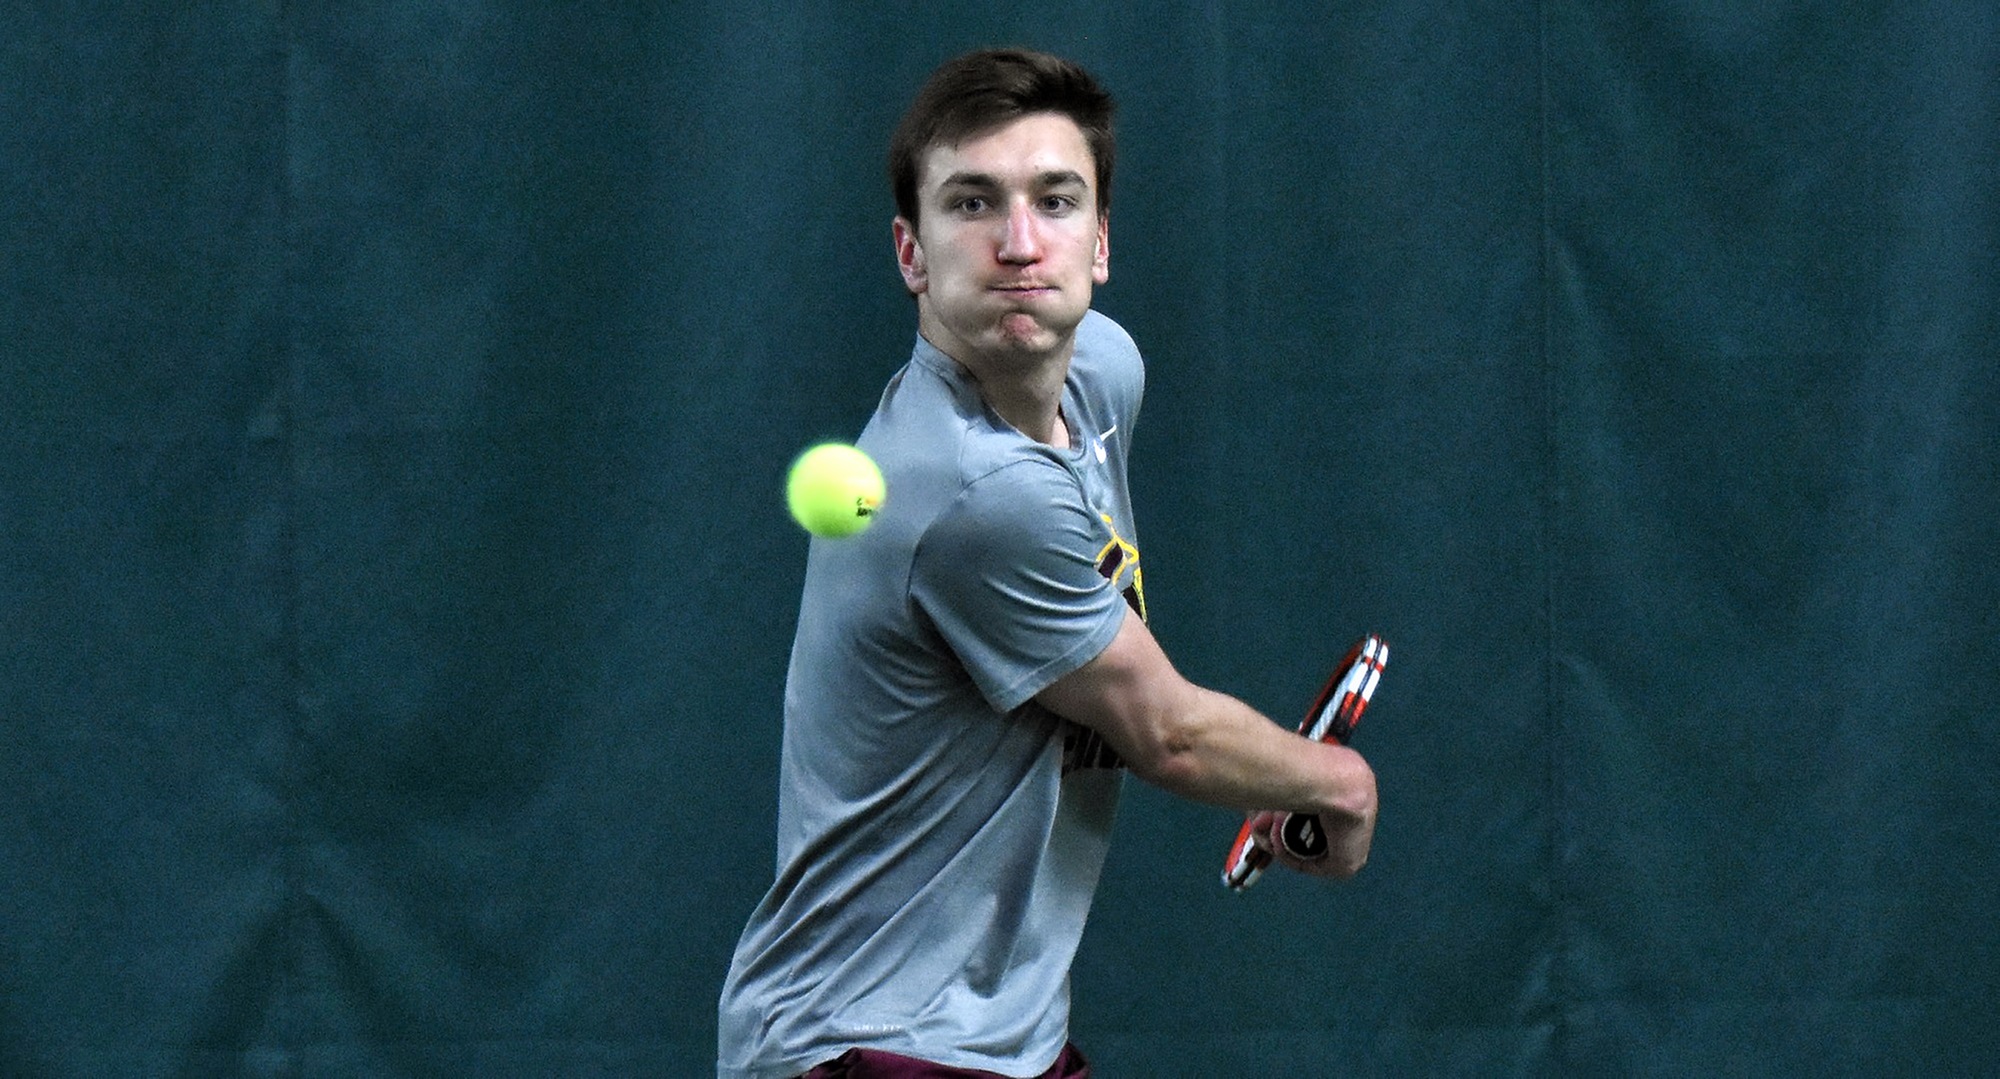 Senior Carter Steffes teamed with David Youngs and played a hotly contested match at No.2 doubles against Carleton in the MIAC opener.